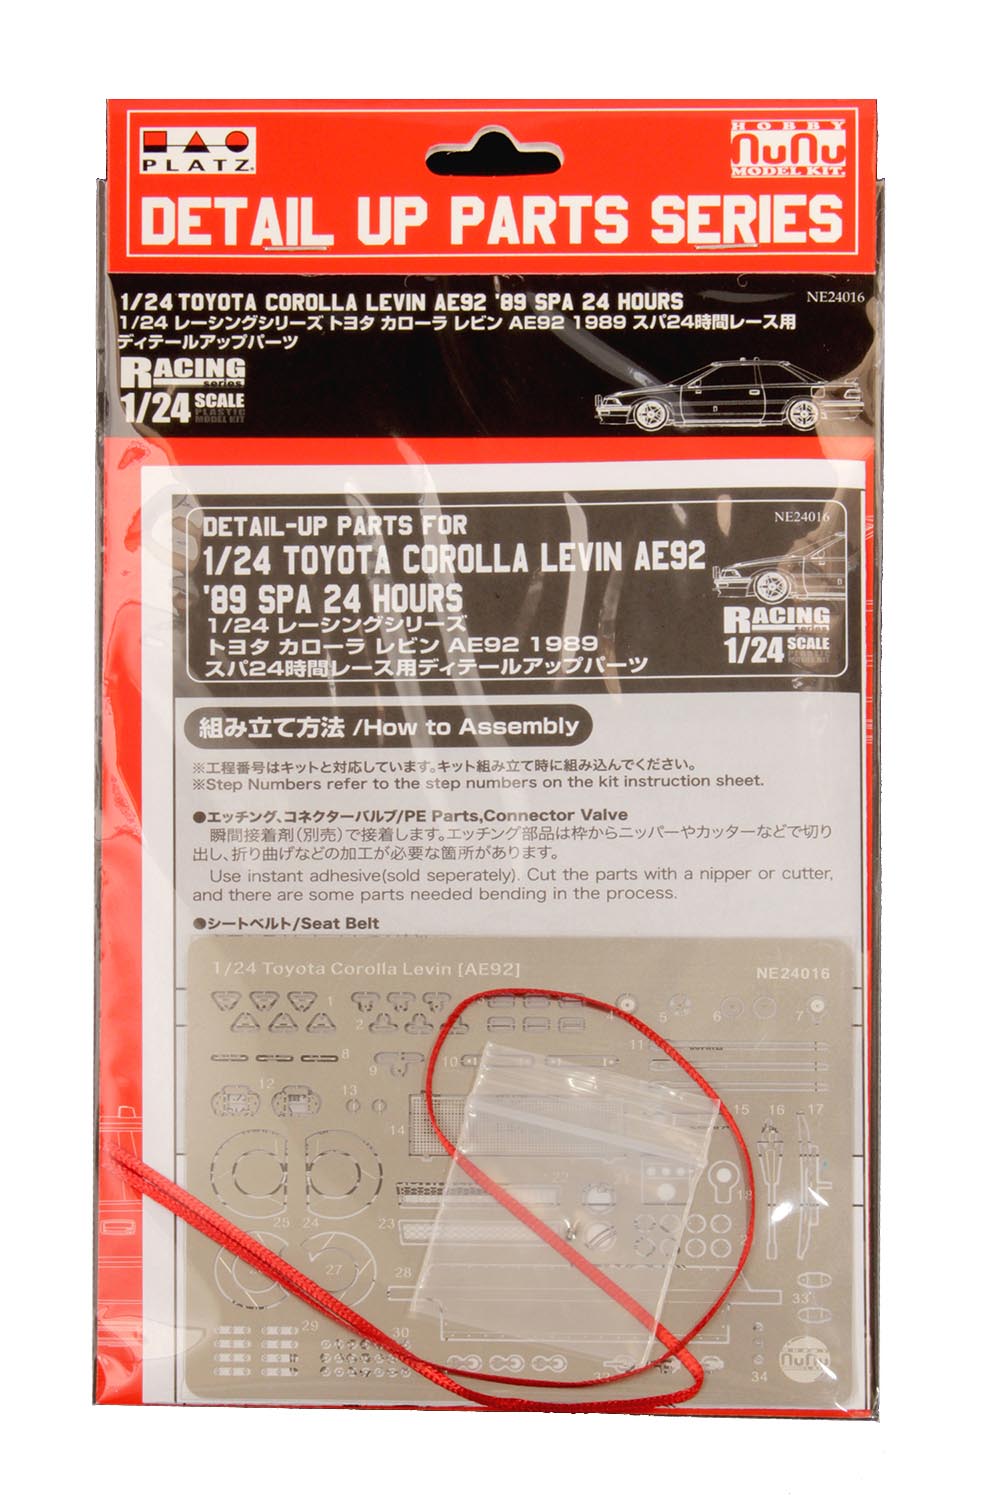 Detail-up Parts for 1/24 TOYOTA COROLLA LEVIN AE92 '89 SPA 24H